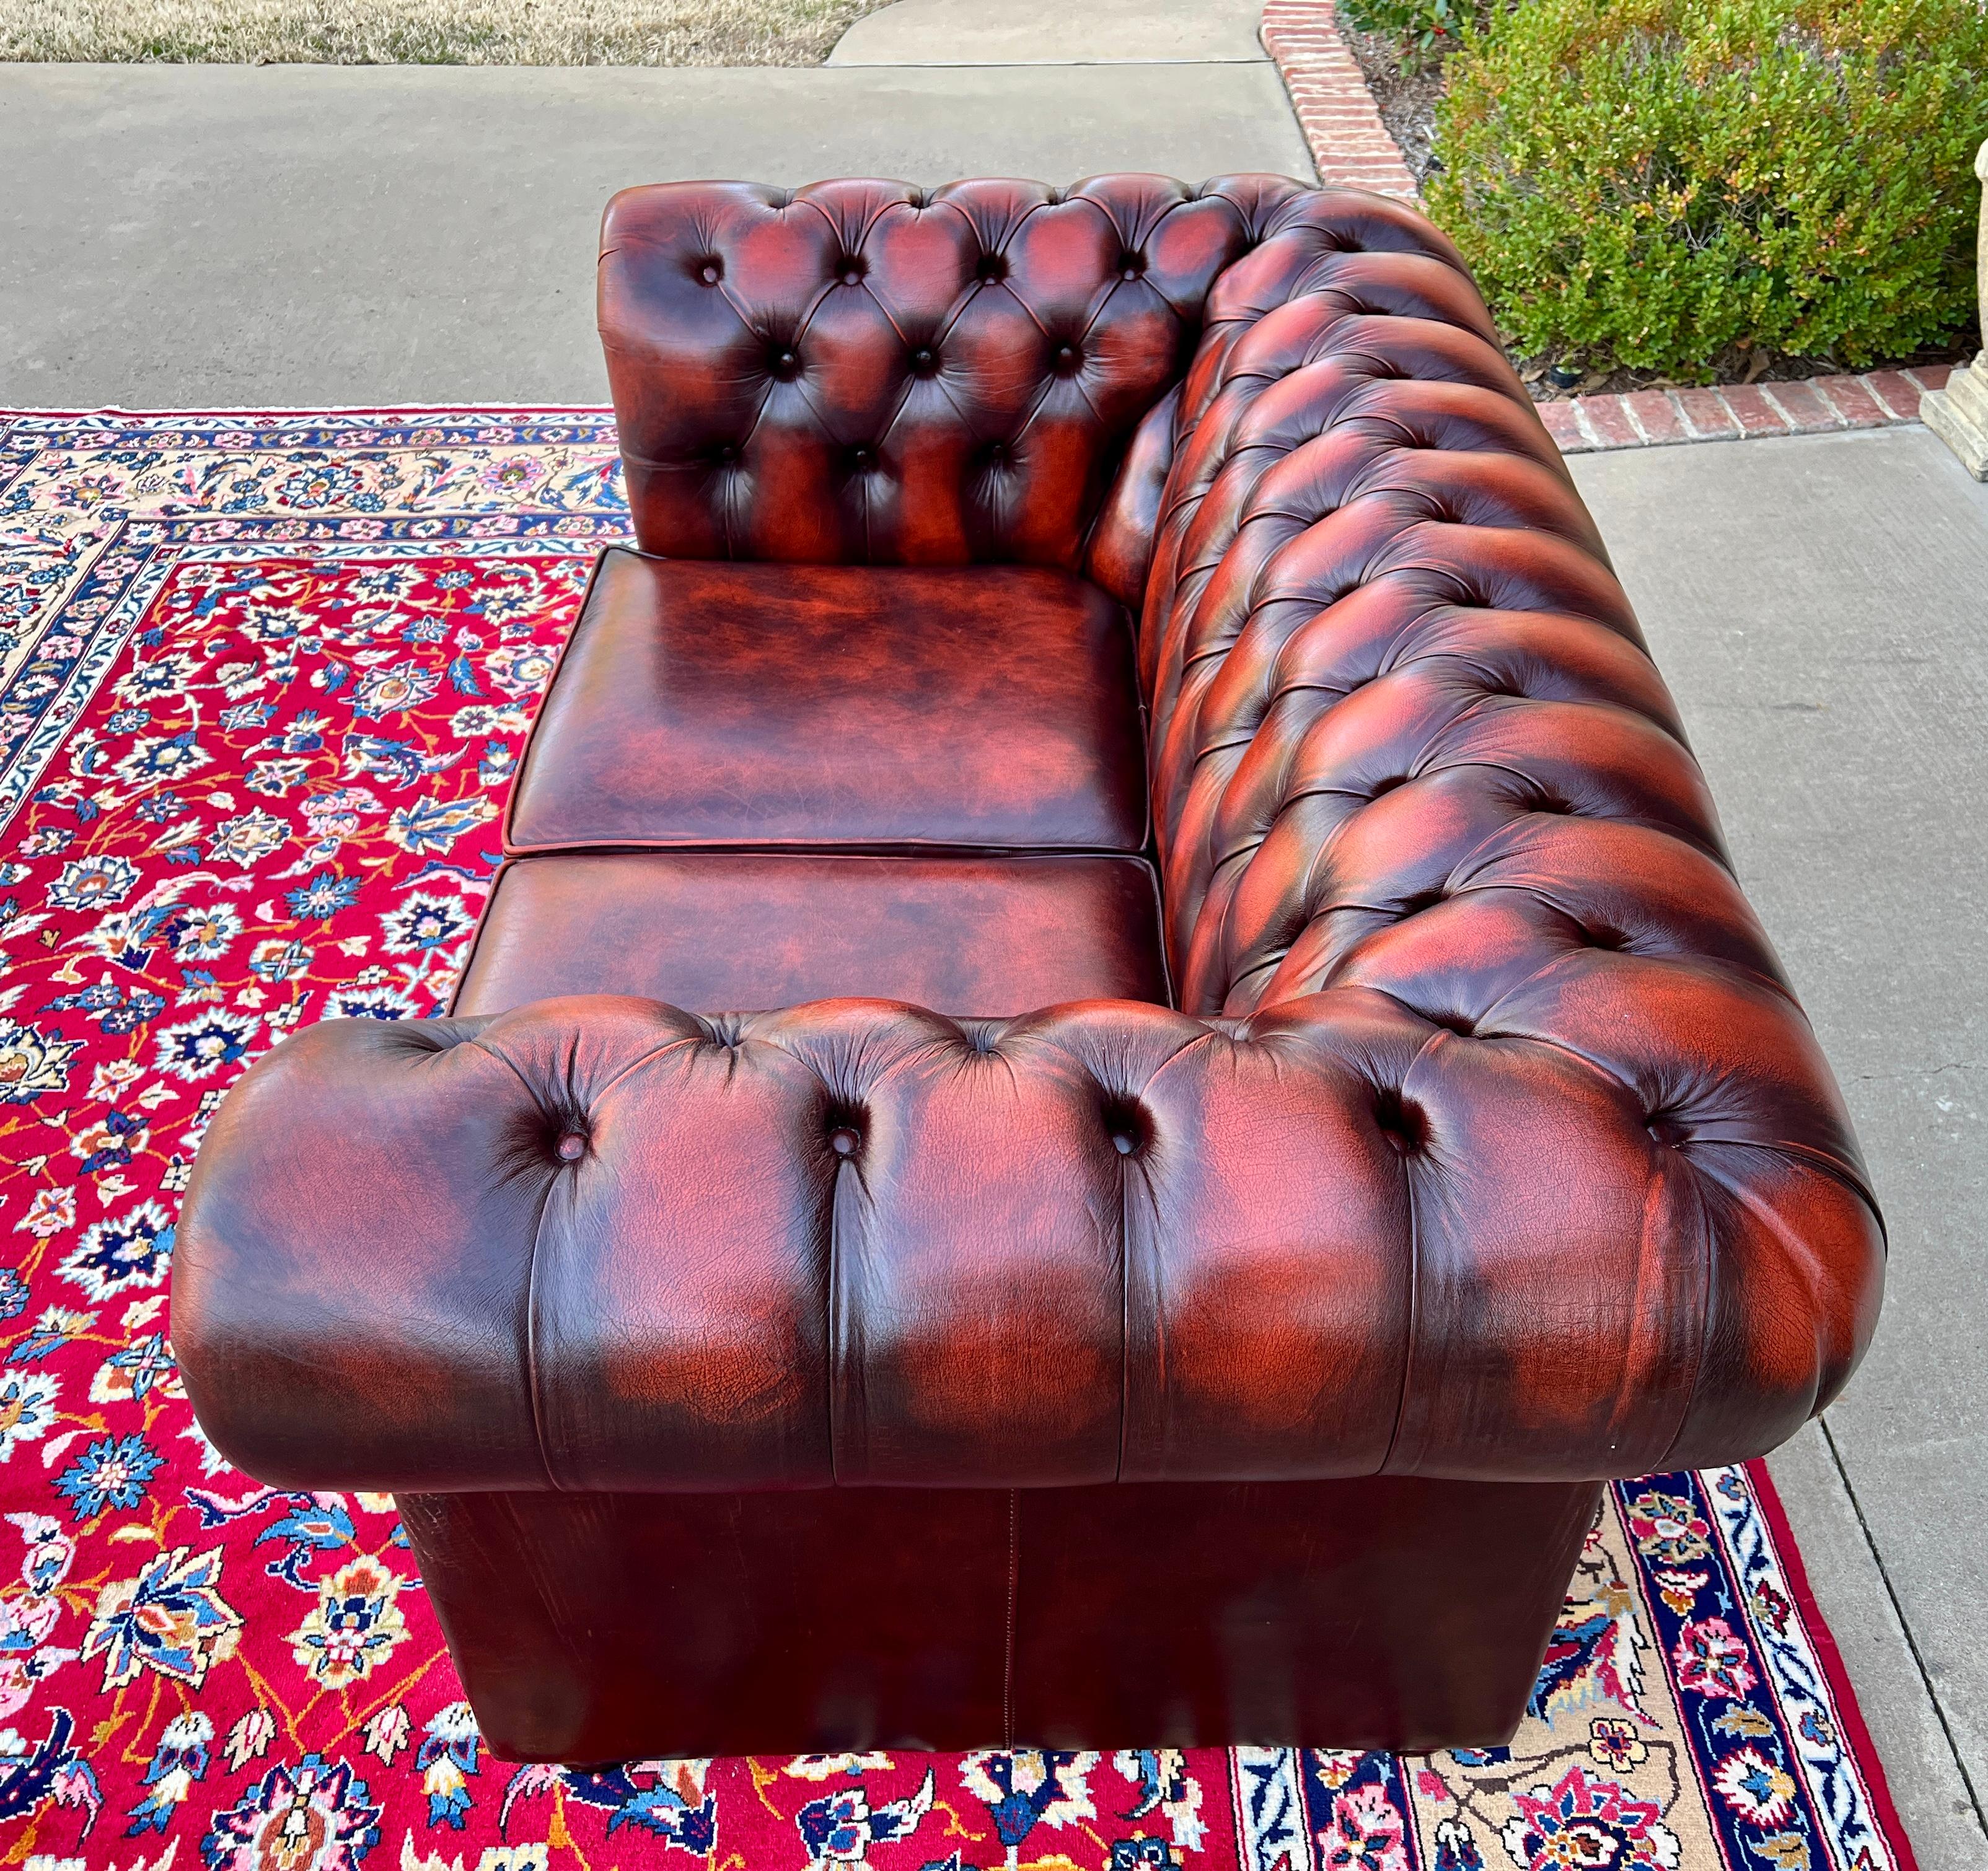 Vintage English Chesterfield Leather Tufted Love Seat Sofa Oxblood Red #2 For Sale 3